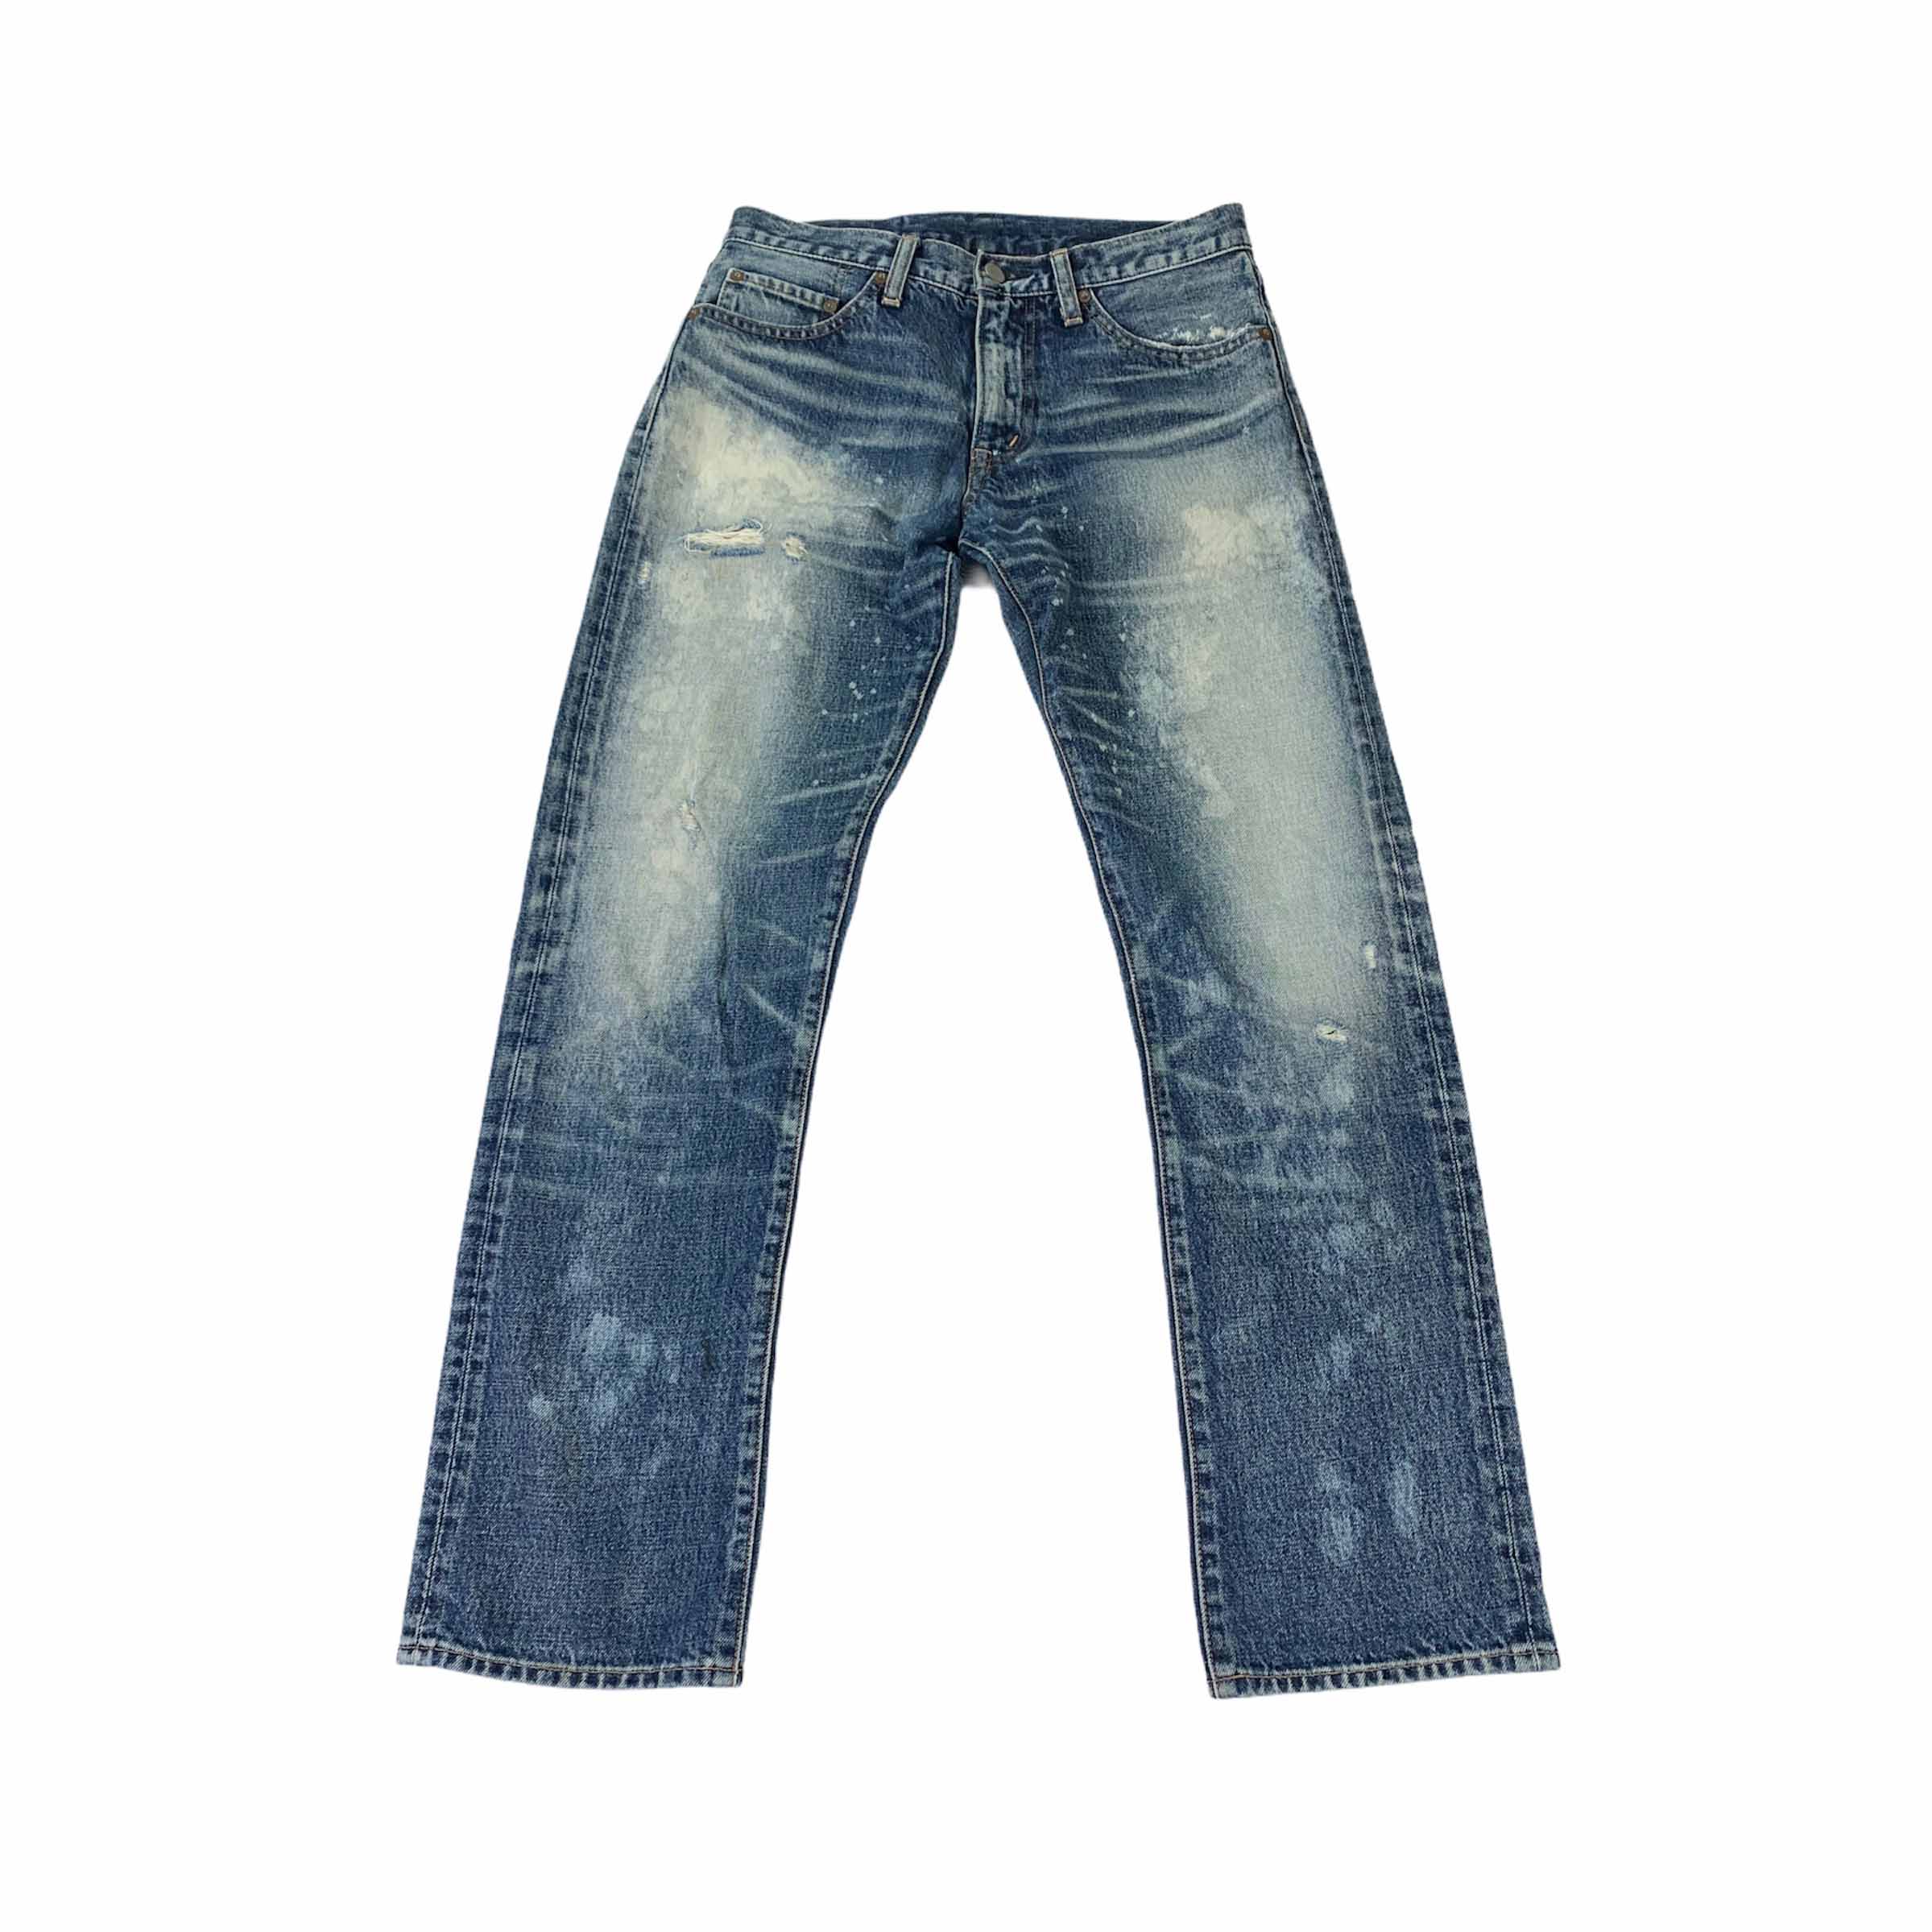 [RNA Inc.] Destroyed Washed Jeans - Size SS